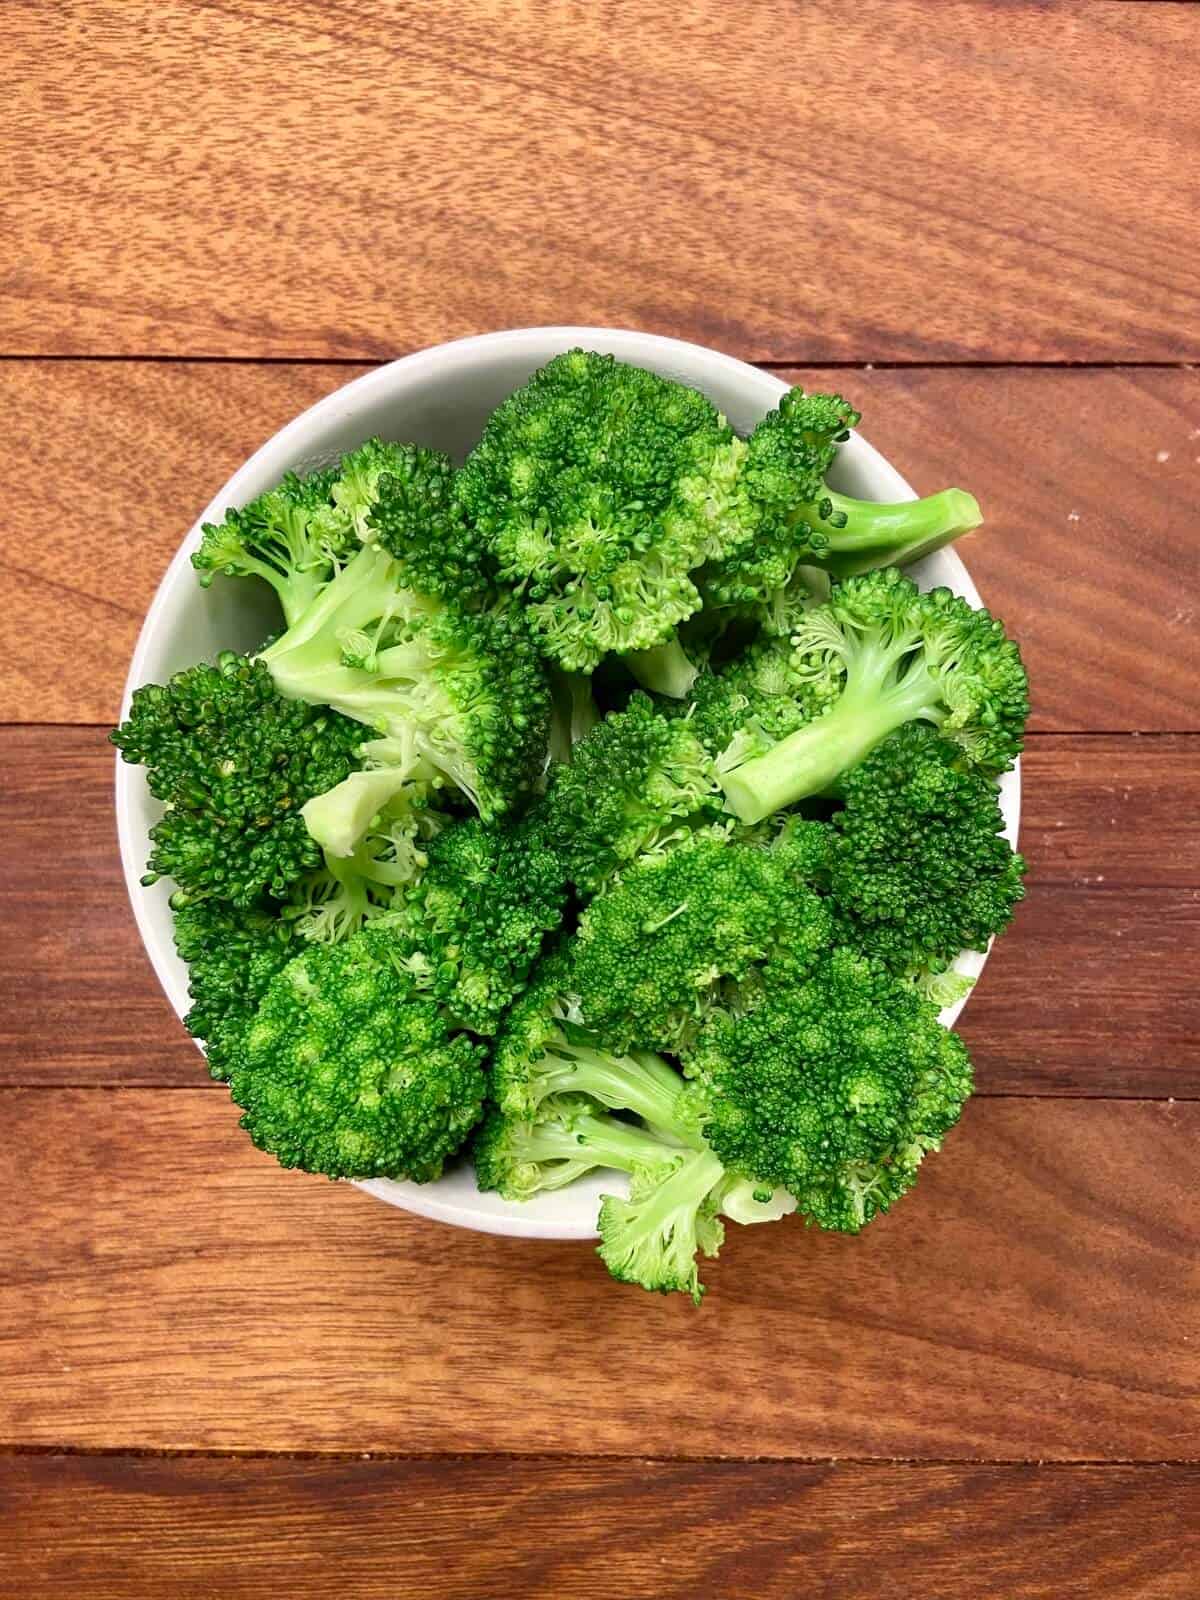 Chopped broccoli florets in a small bowl.